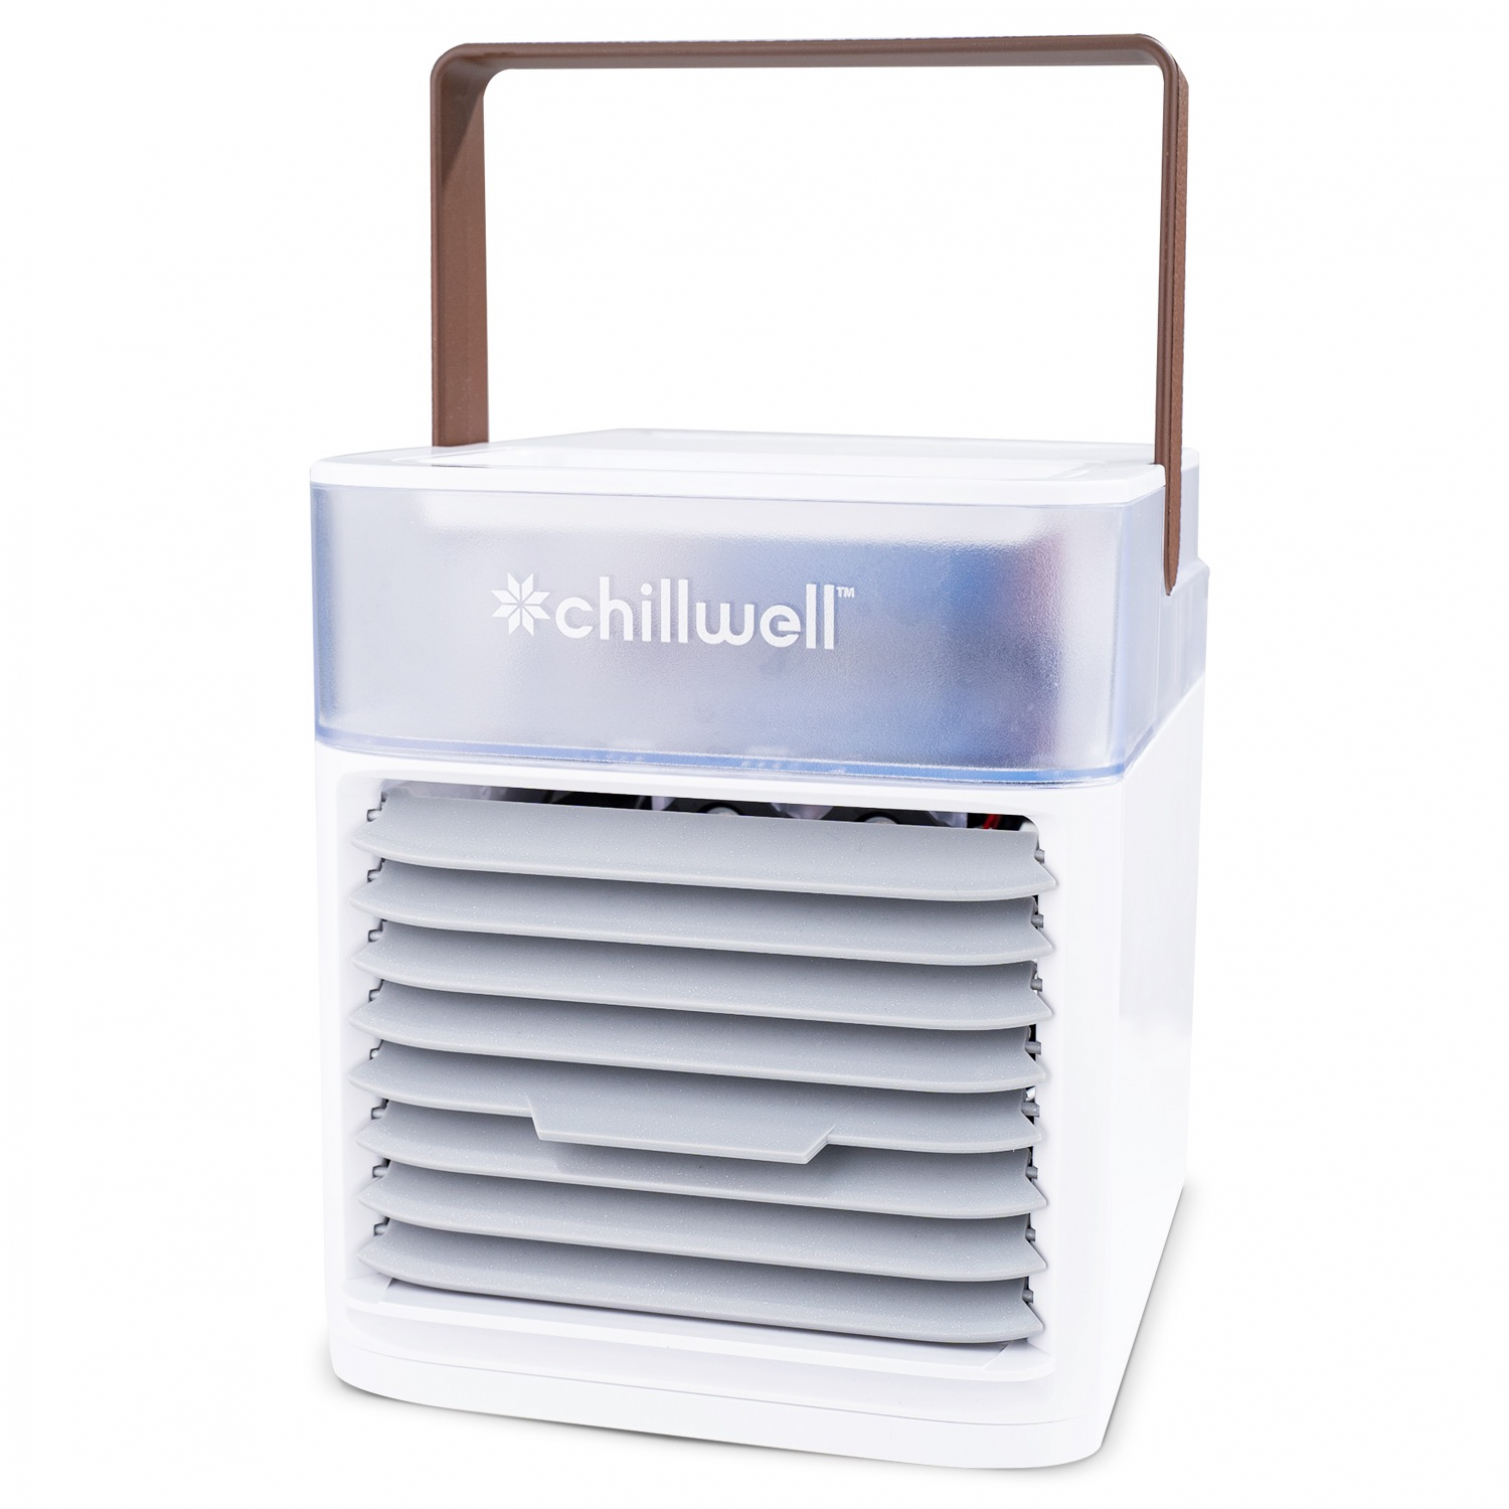 Chillwell Ac Cooler Tower